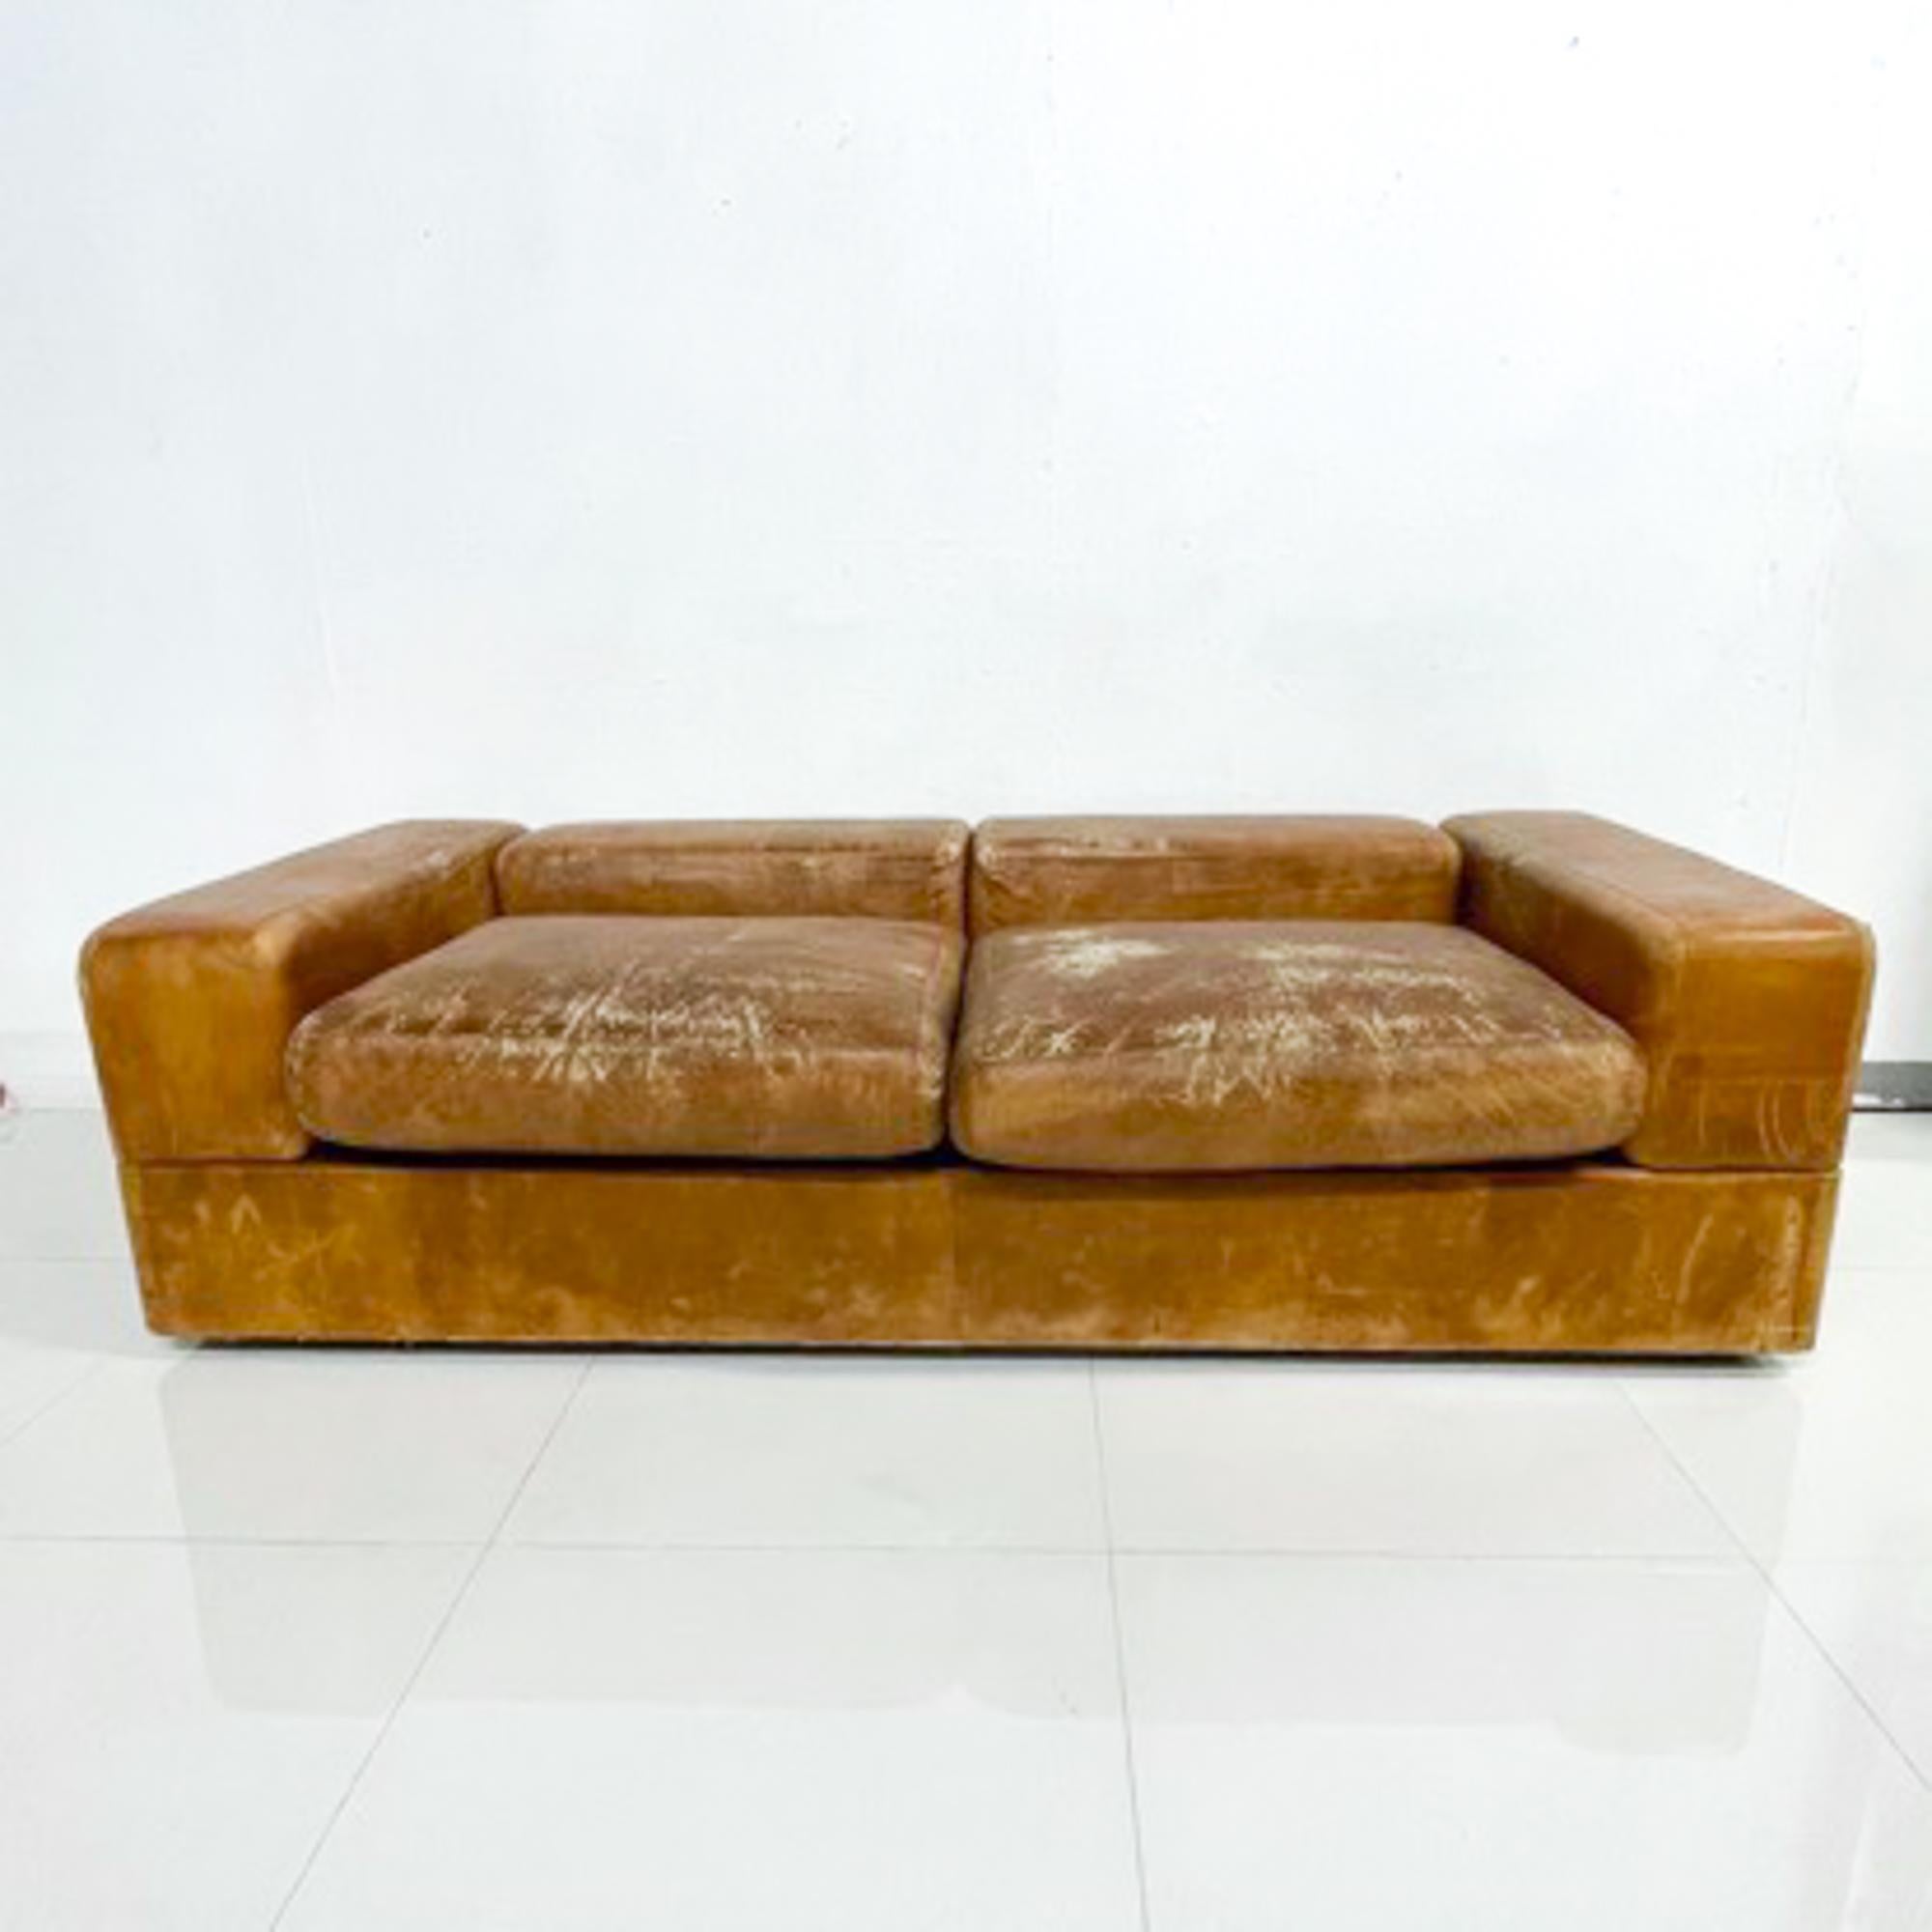 Vintage Italian Sofa model 711 designed by Tito Agnoli for Cinova
Italy 1960s.
The sofa can be transformed into a daybed. 
Tan leather (original) with vintage patina.
Fair condition, the cushions are comfortable, leather has wear and has gone